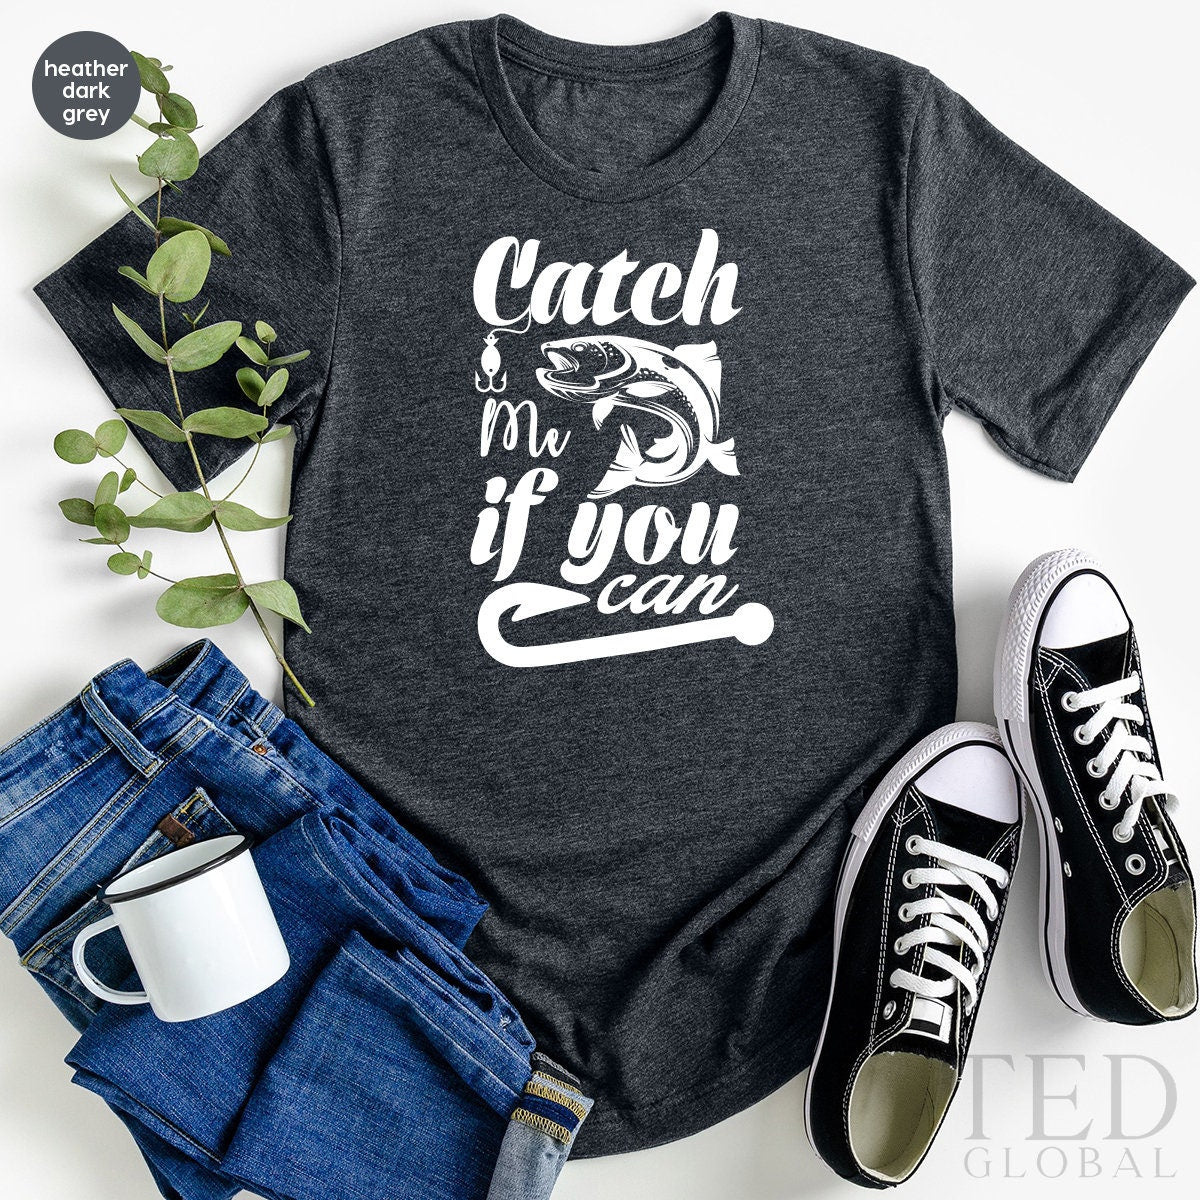 Fishing Tshirt, Cool Fisherman T Shirt, Fisher Men Shirt, Shirt for Fly Fisher Dad, Fathers Day Shirt, Boating Lover Tees, Gift for Husband